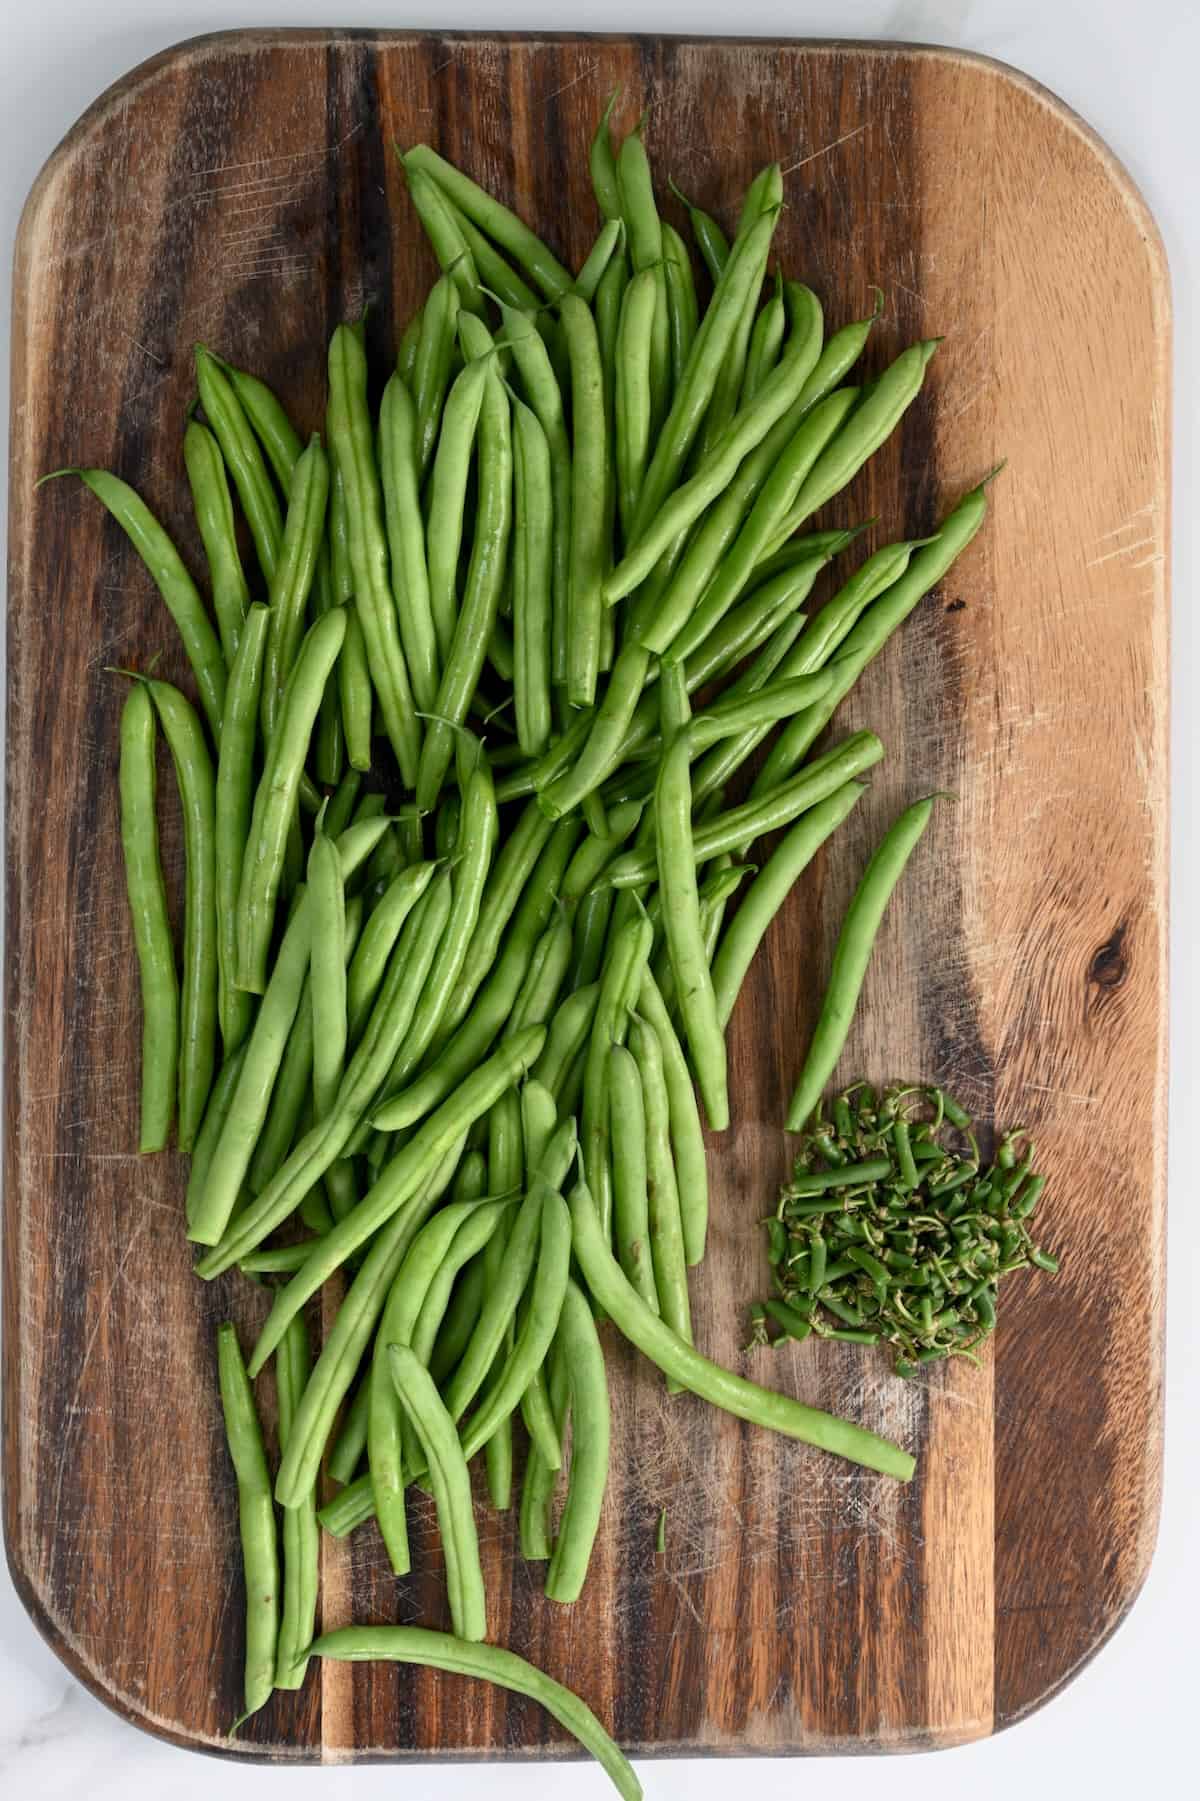 Removing the ends from green beans